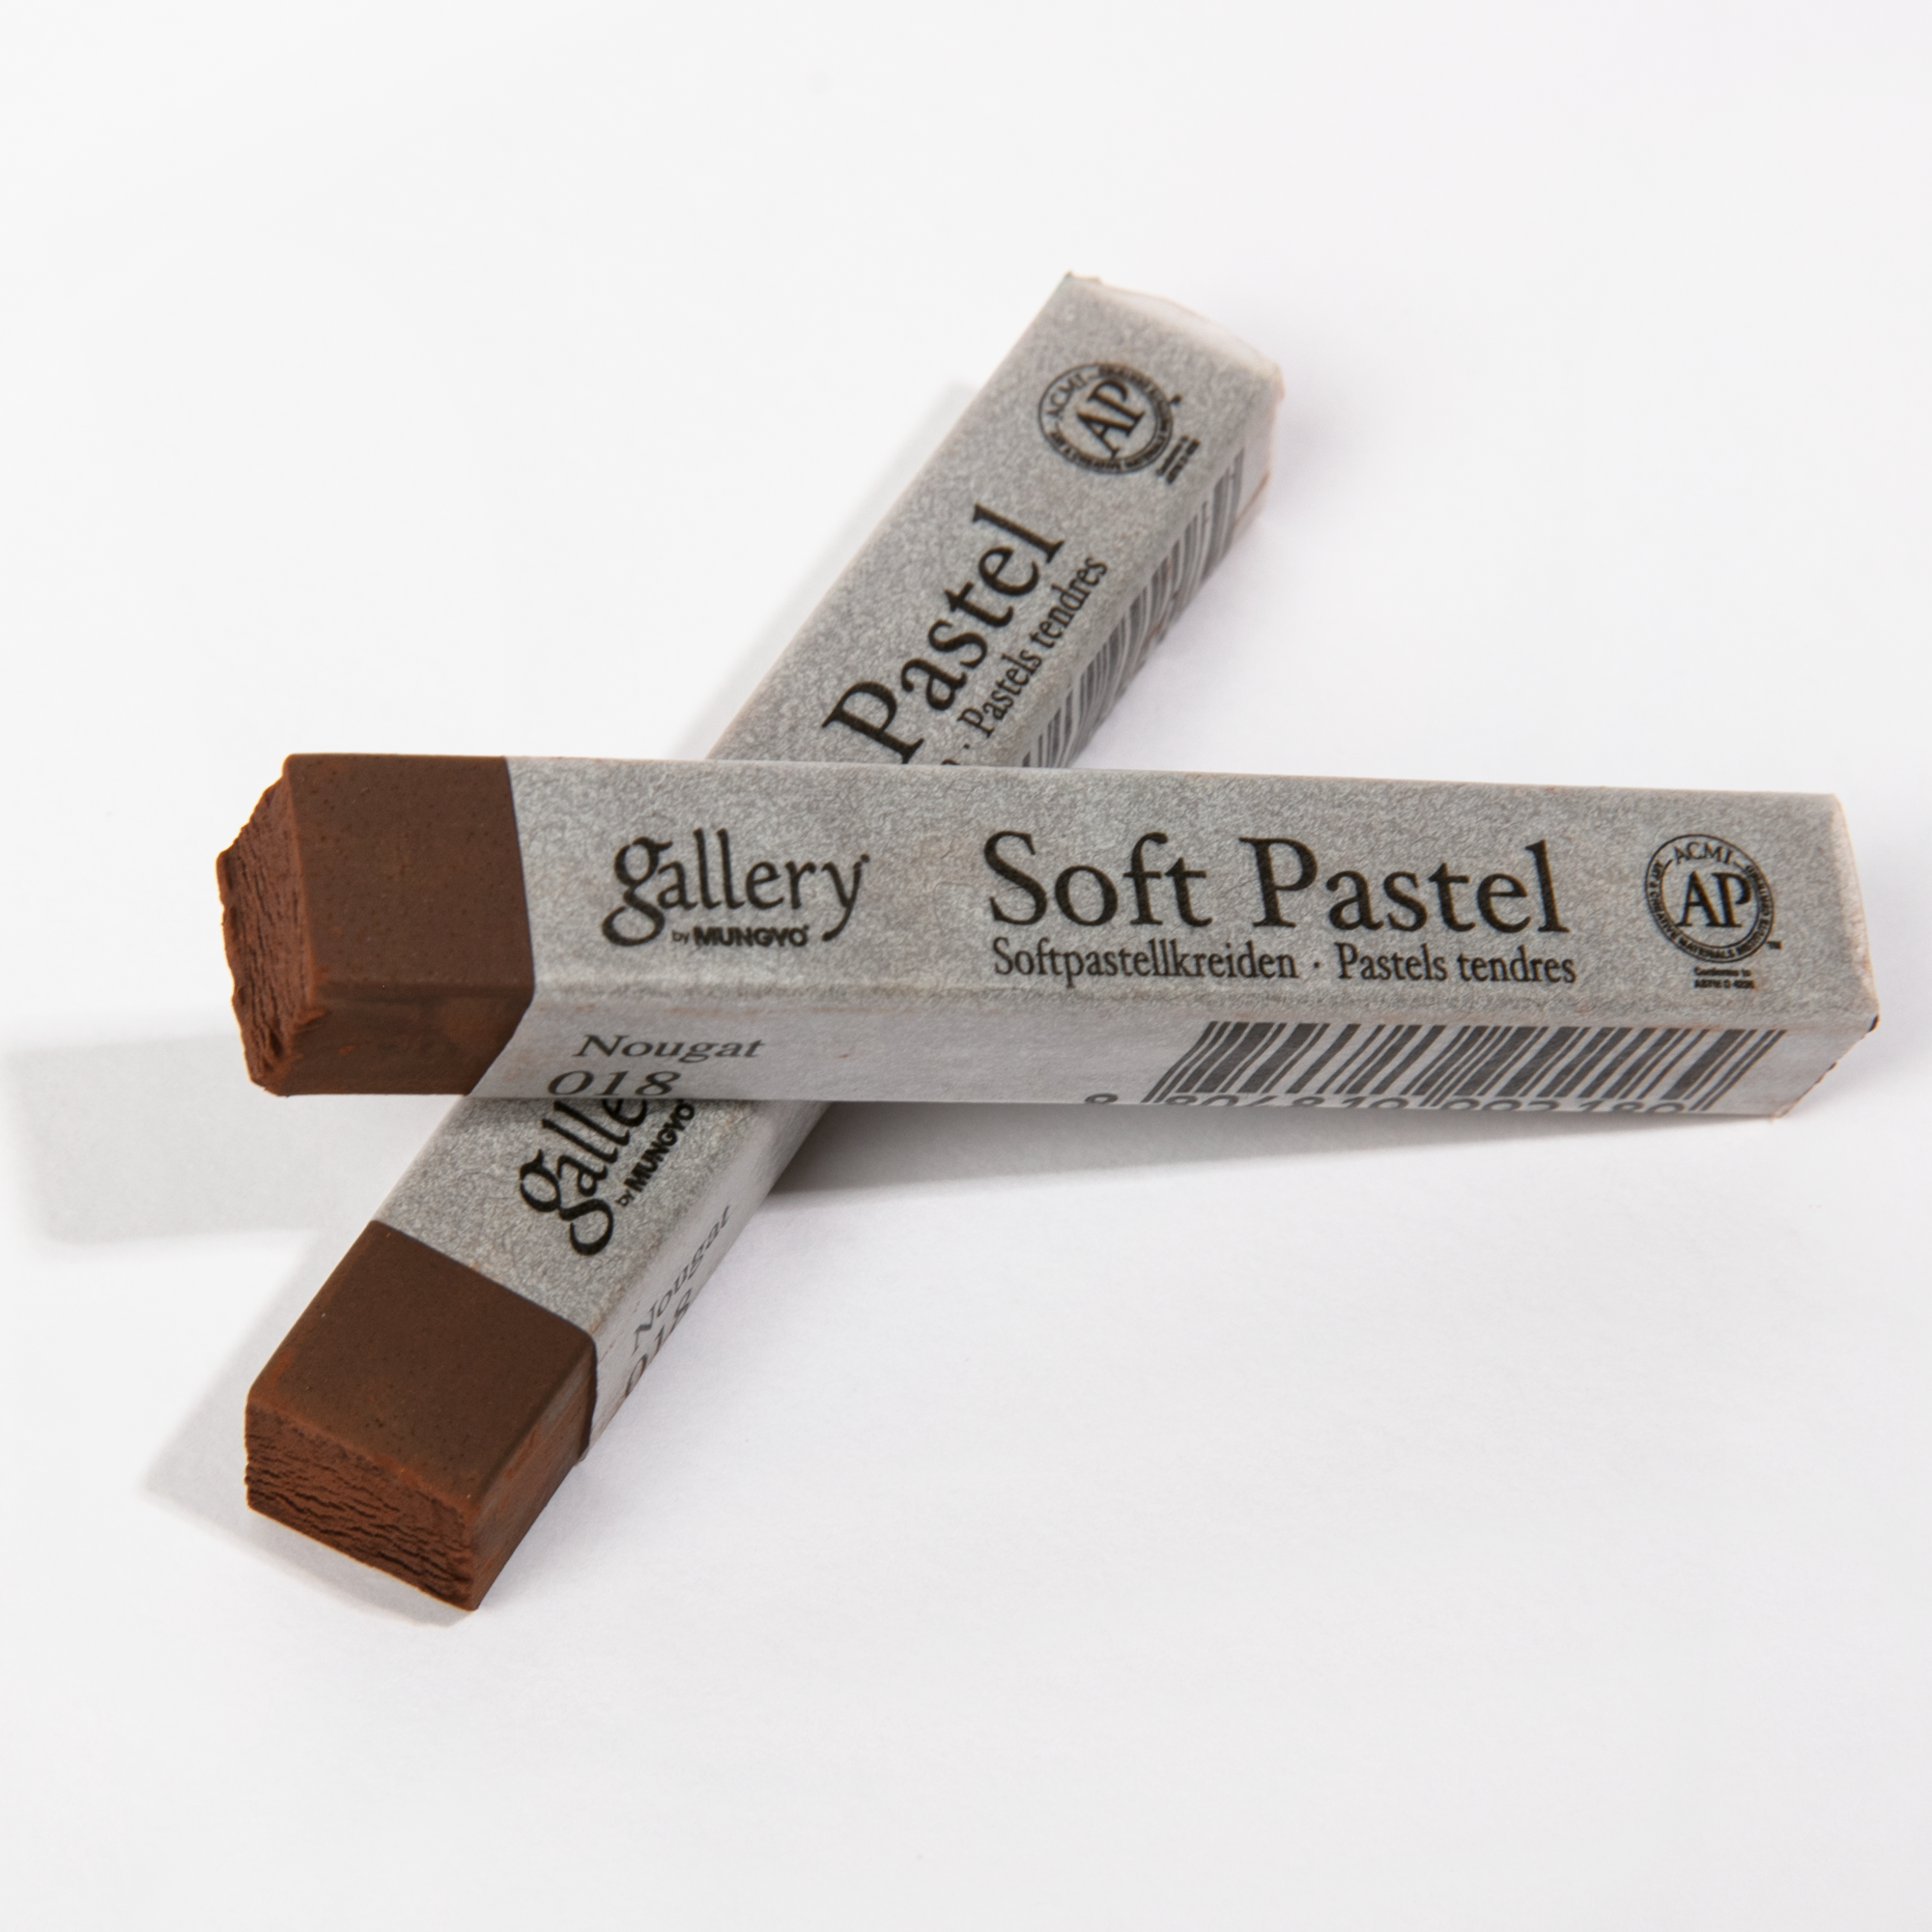 The Mungyo Gallery Soft Artist Pastel - Nougat 018 569 website is